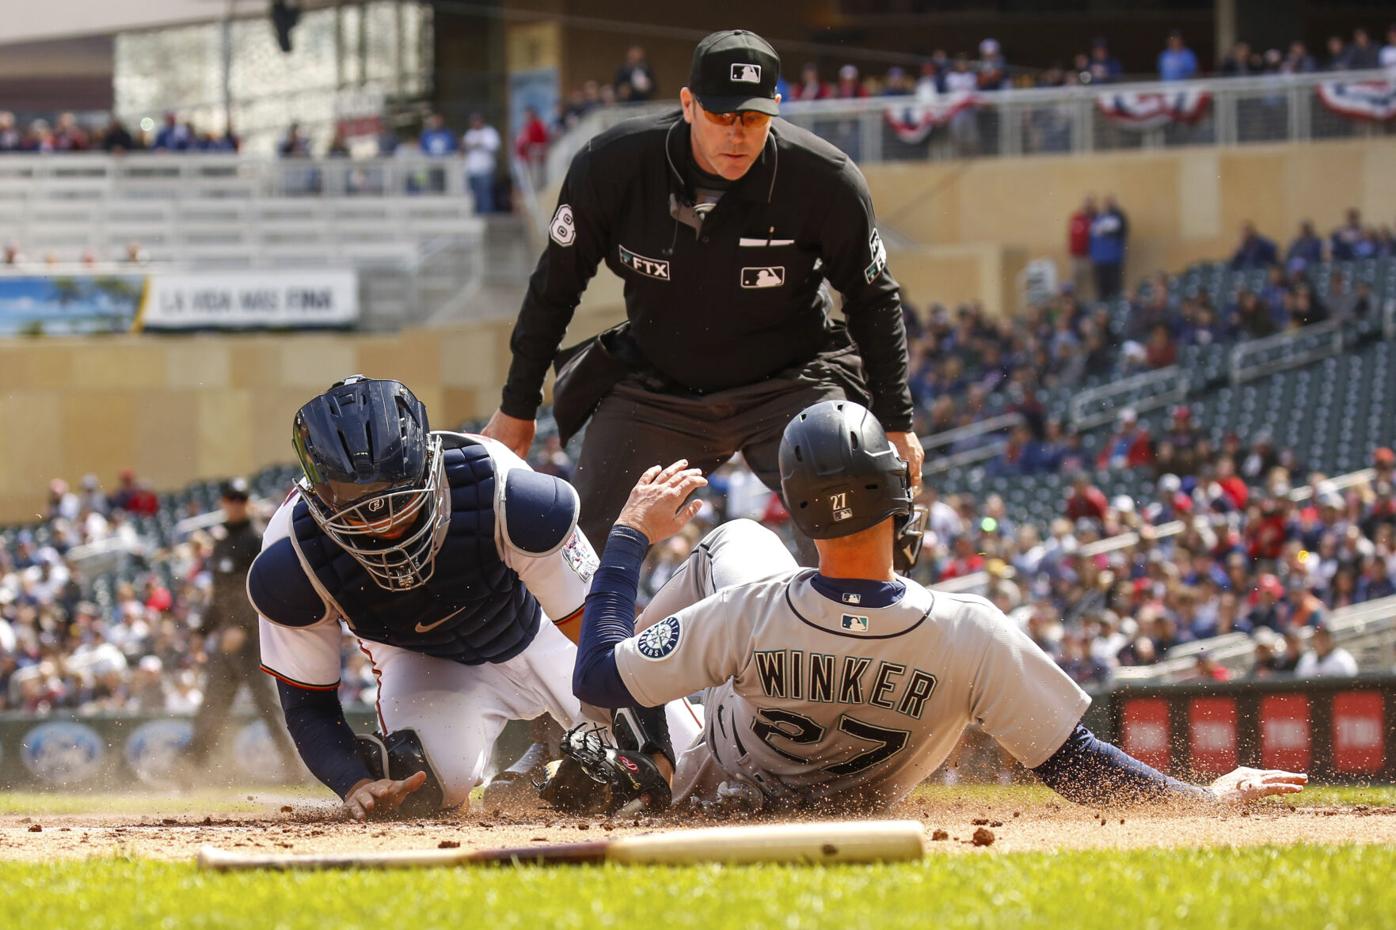 MLB umpires may get on-field microphones to explain replay review